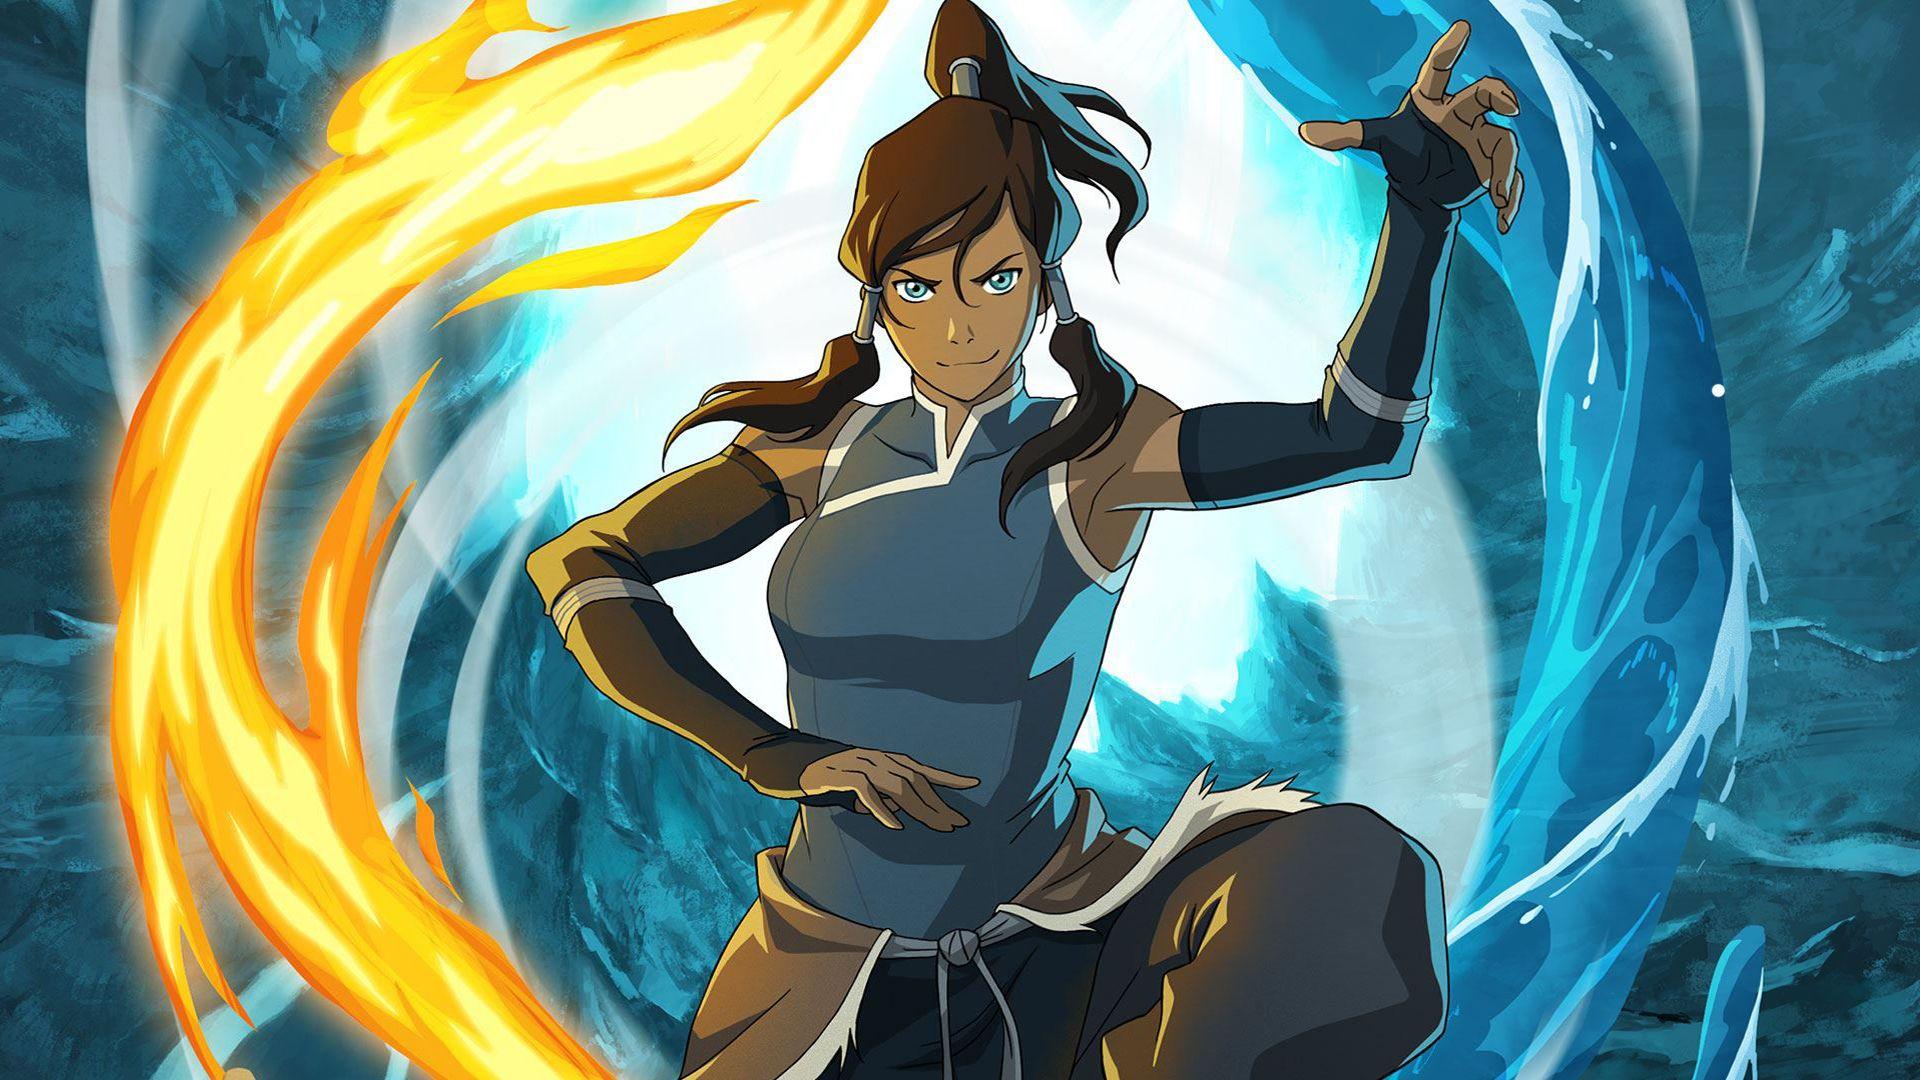 Korra And Asami Finally Have A First Date In The New Legend of Korra